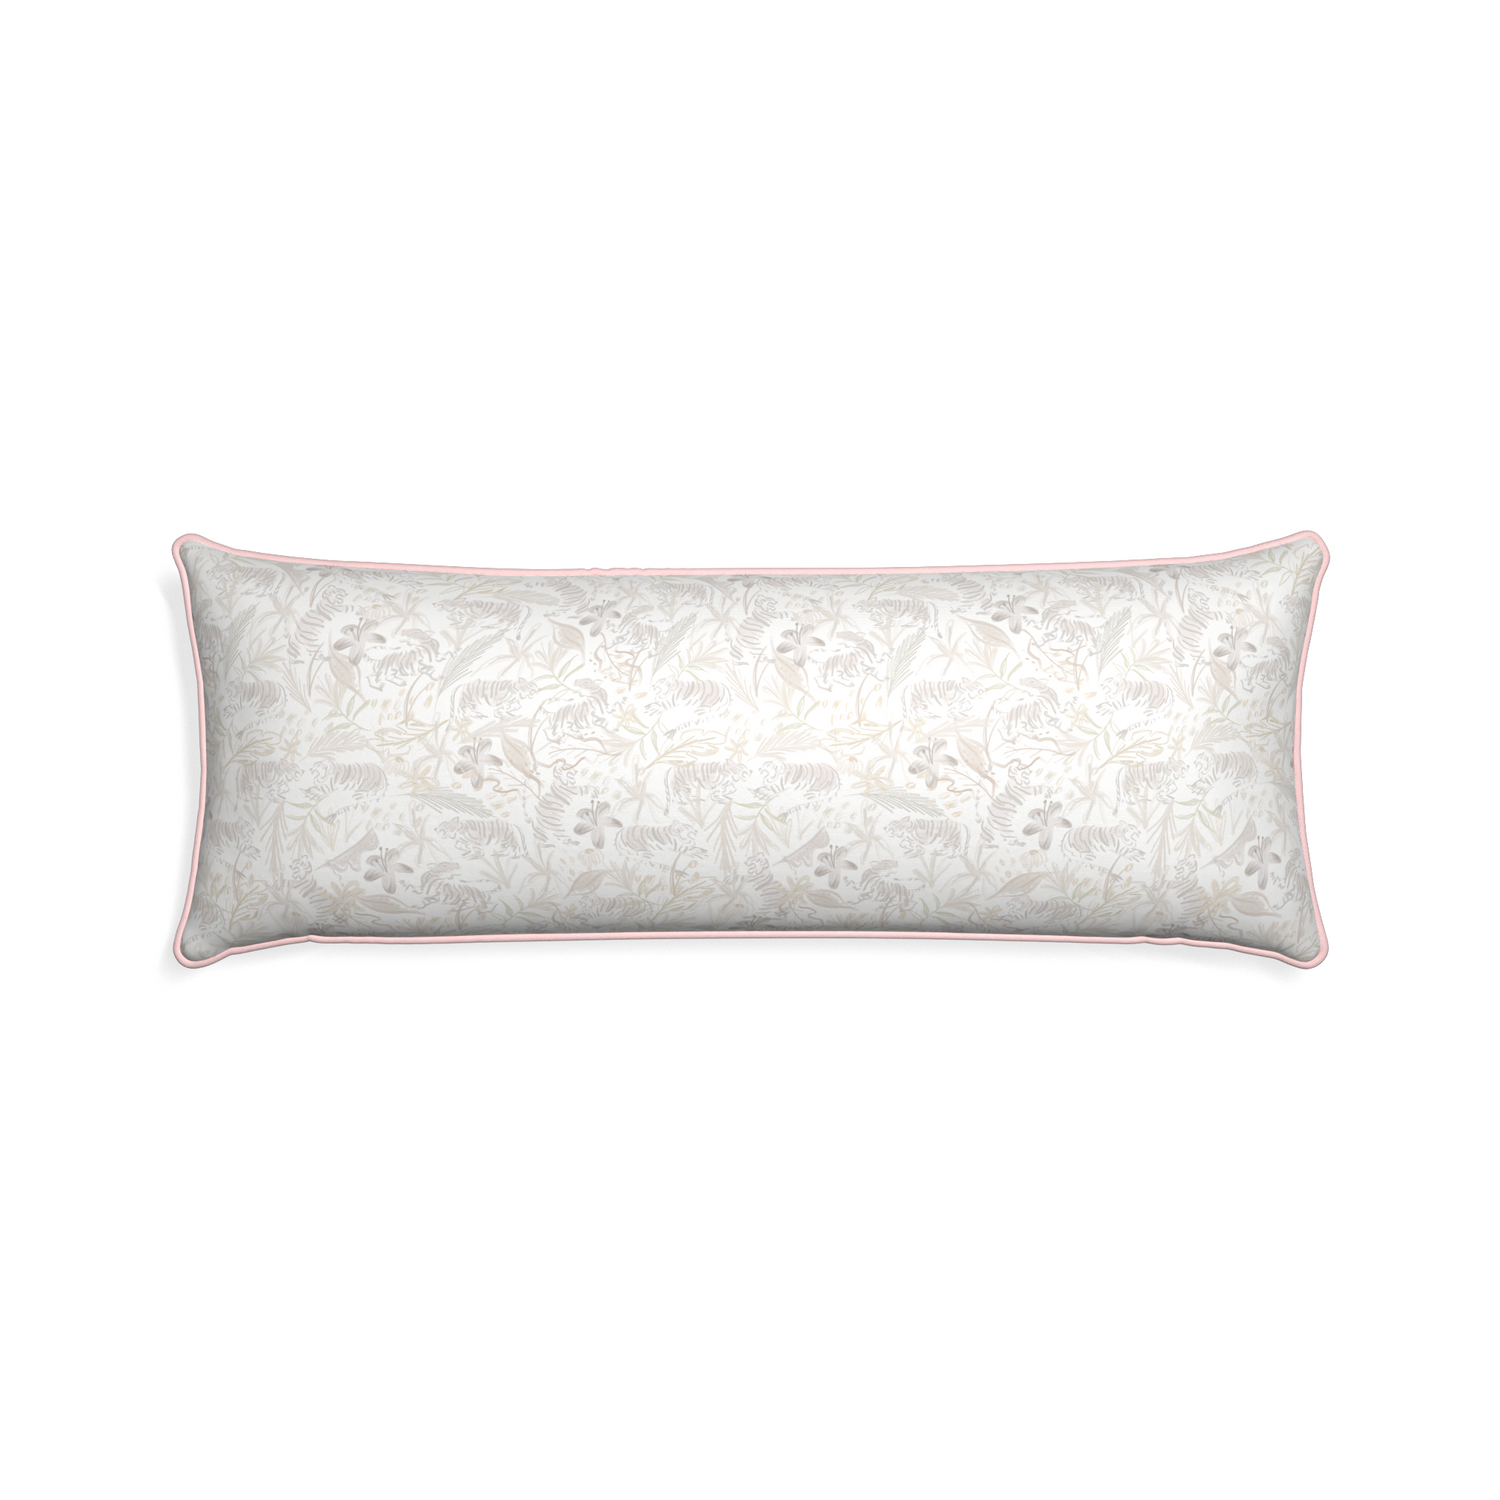 Xl-lumbar frida sand custom beige chinoiserie tigerpillow with petal piping on white background